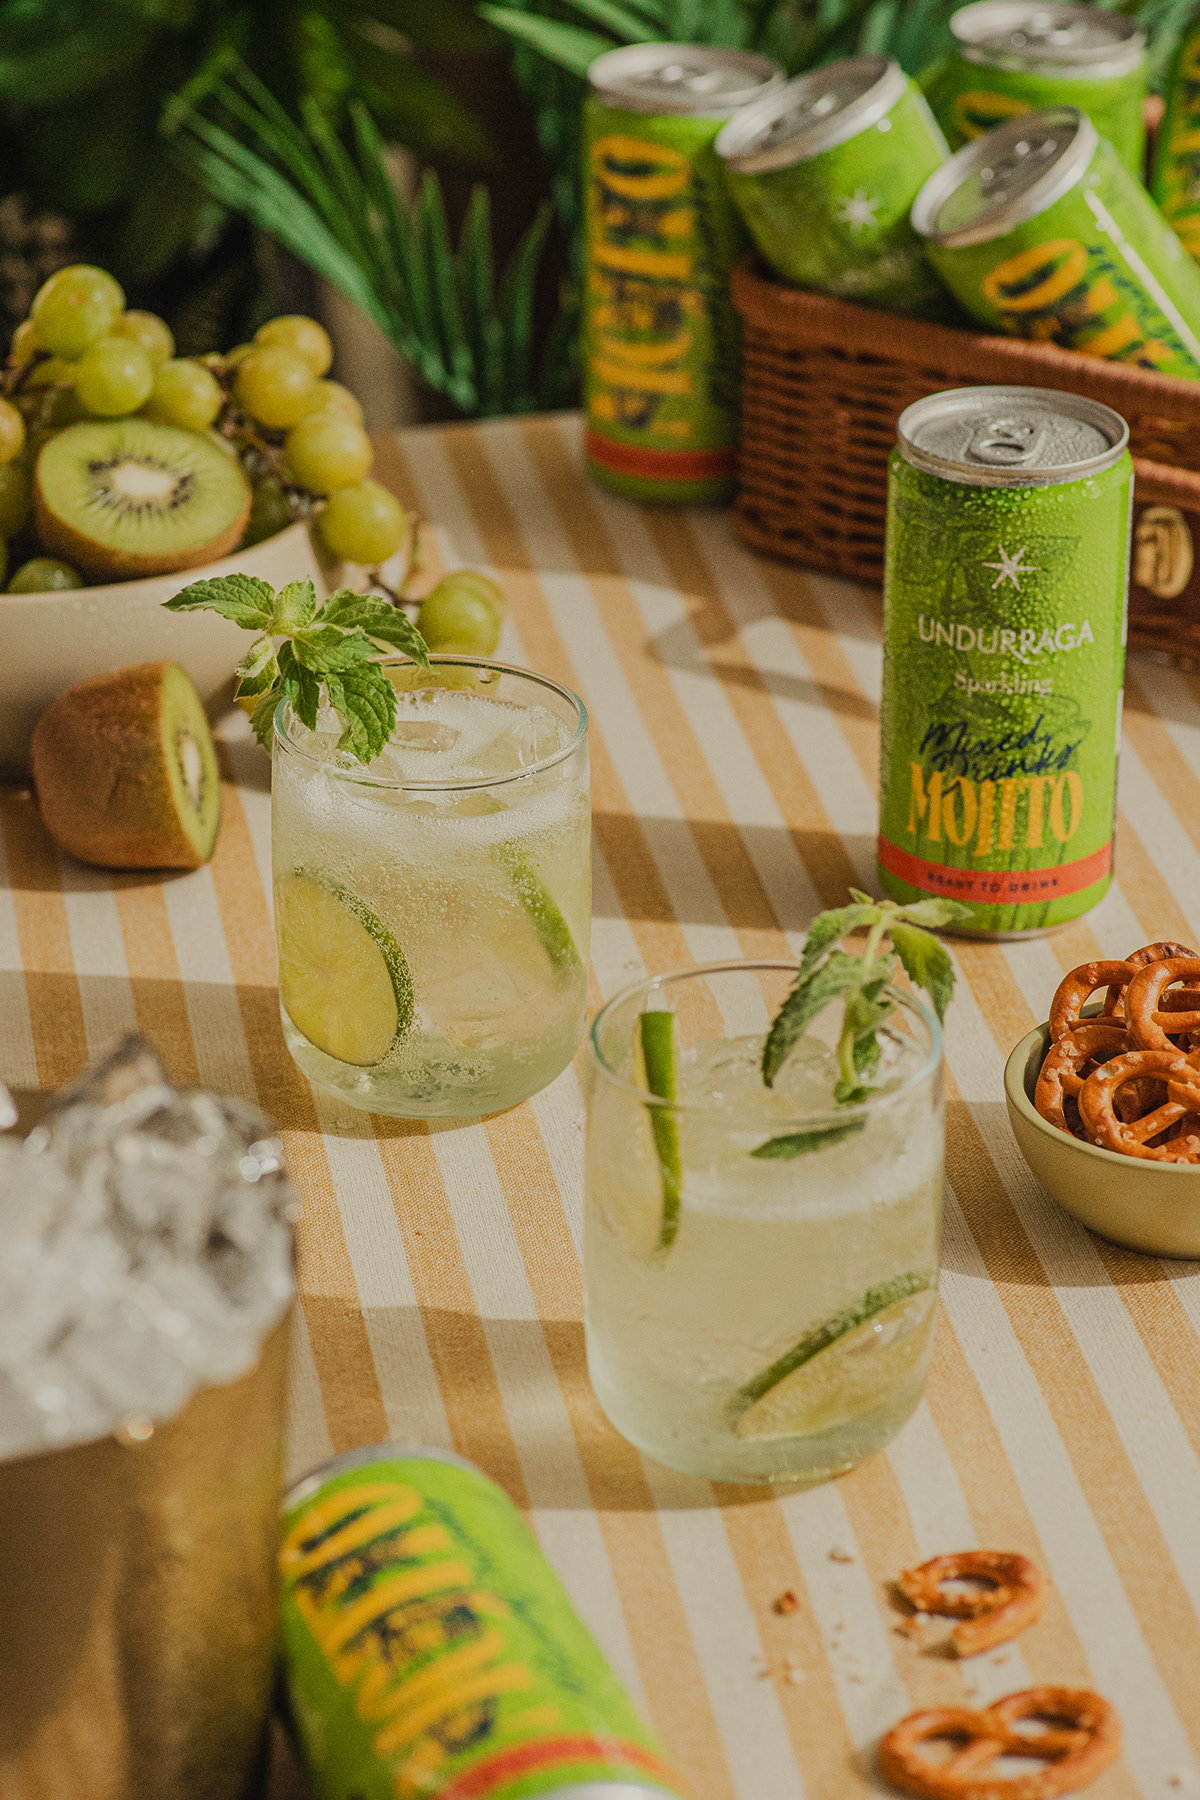 mojito Tropical sparkling wine trago lata canned can alcohol Food 